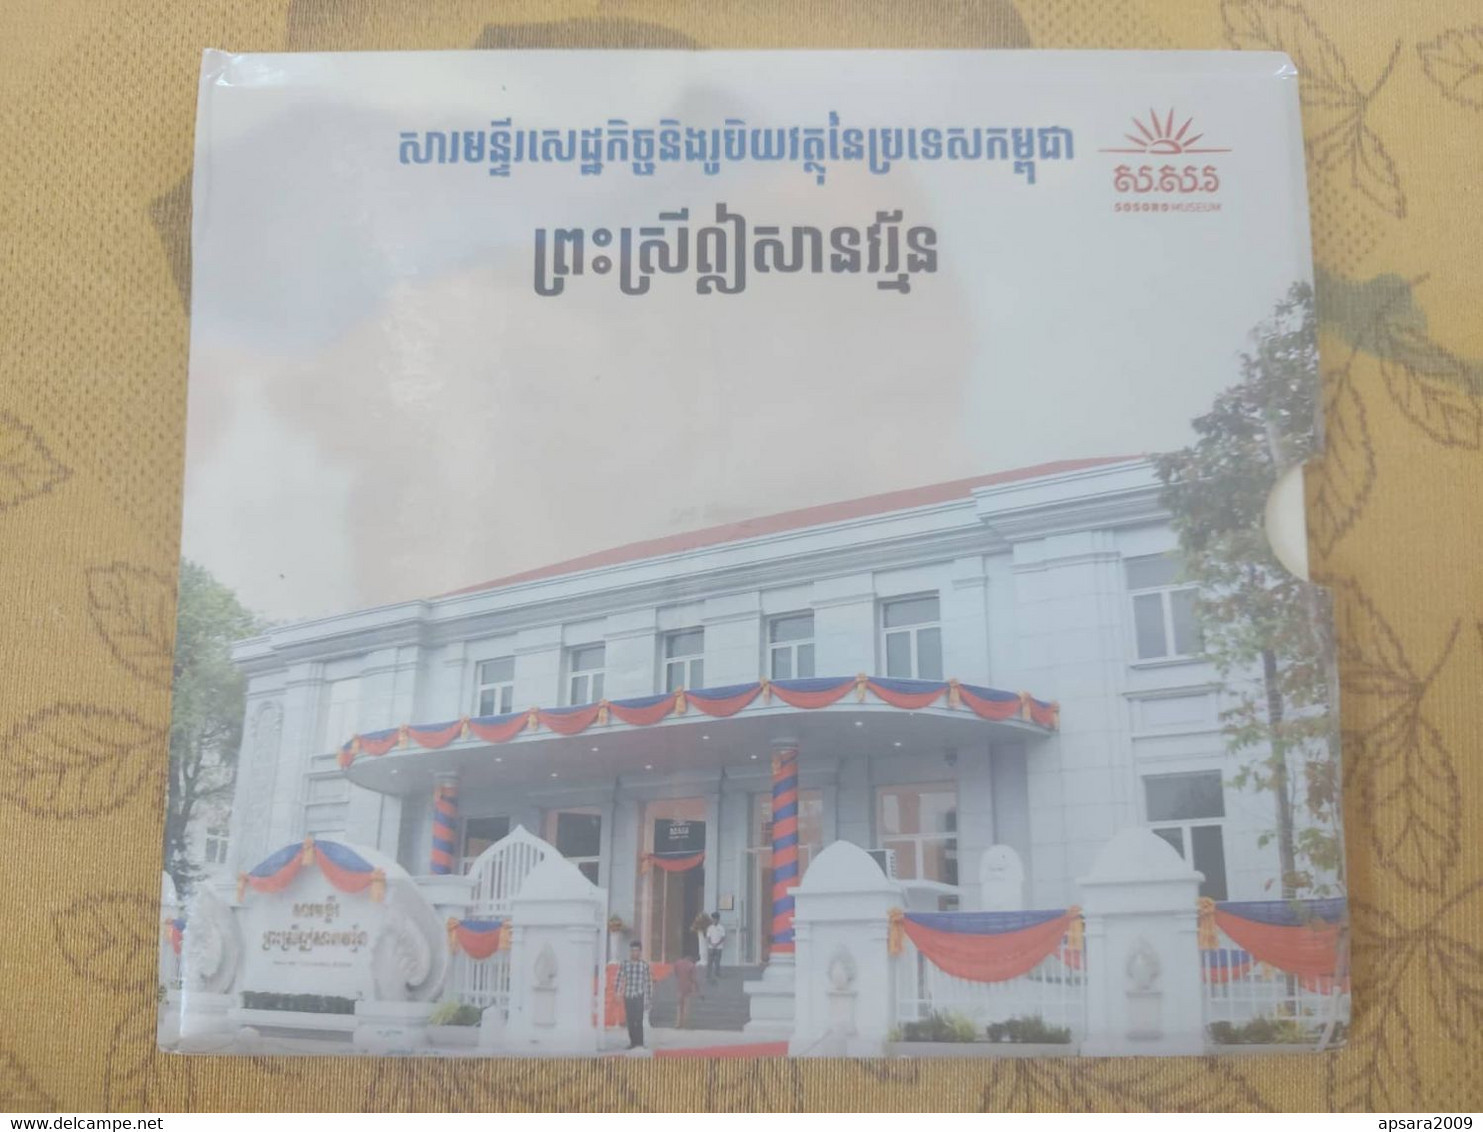 CAMBODGE / Souvenir Cover Of Cambodian Coins Made By Cambodia Coin Museum. - Cambodja